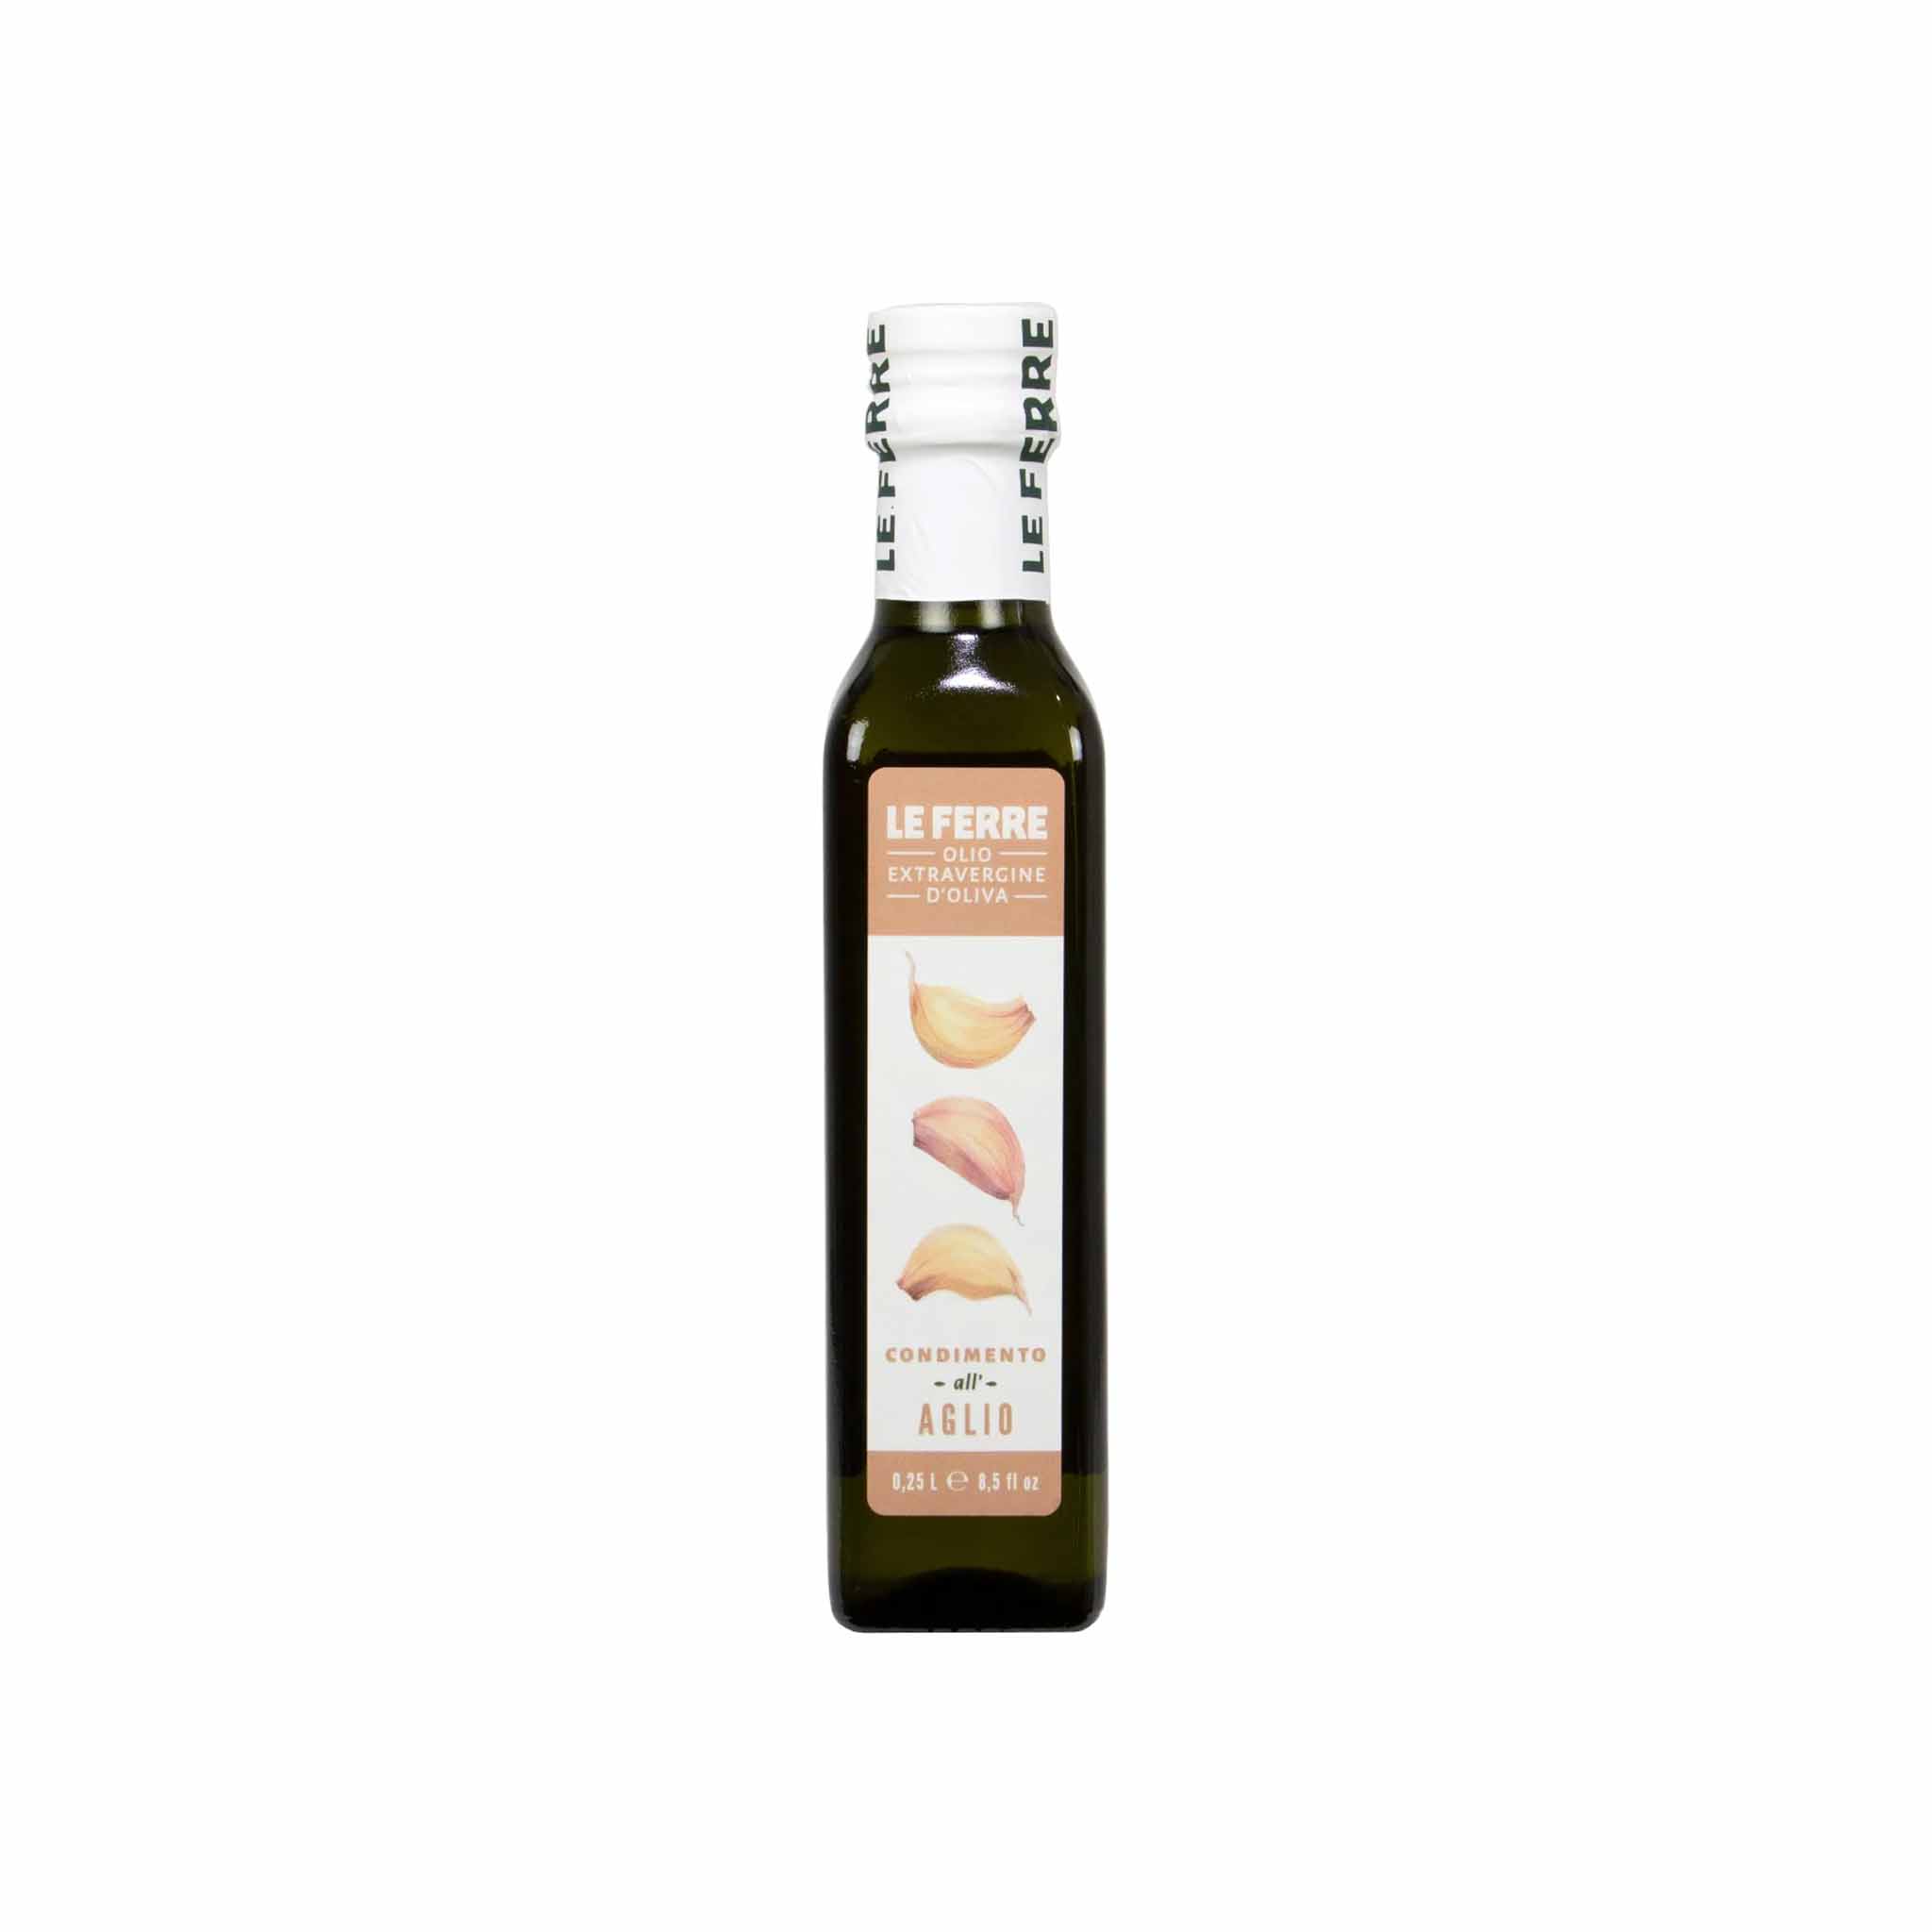 LE FERRE GARLIC INFUSED EXTRA VIRGIN OLIVE OIL 250ml